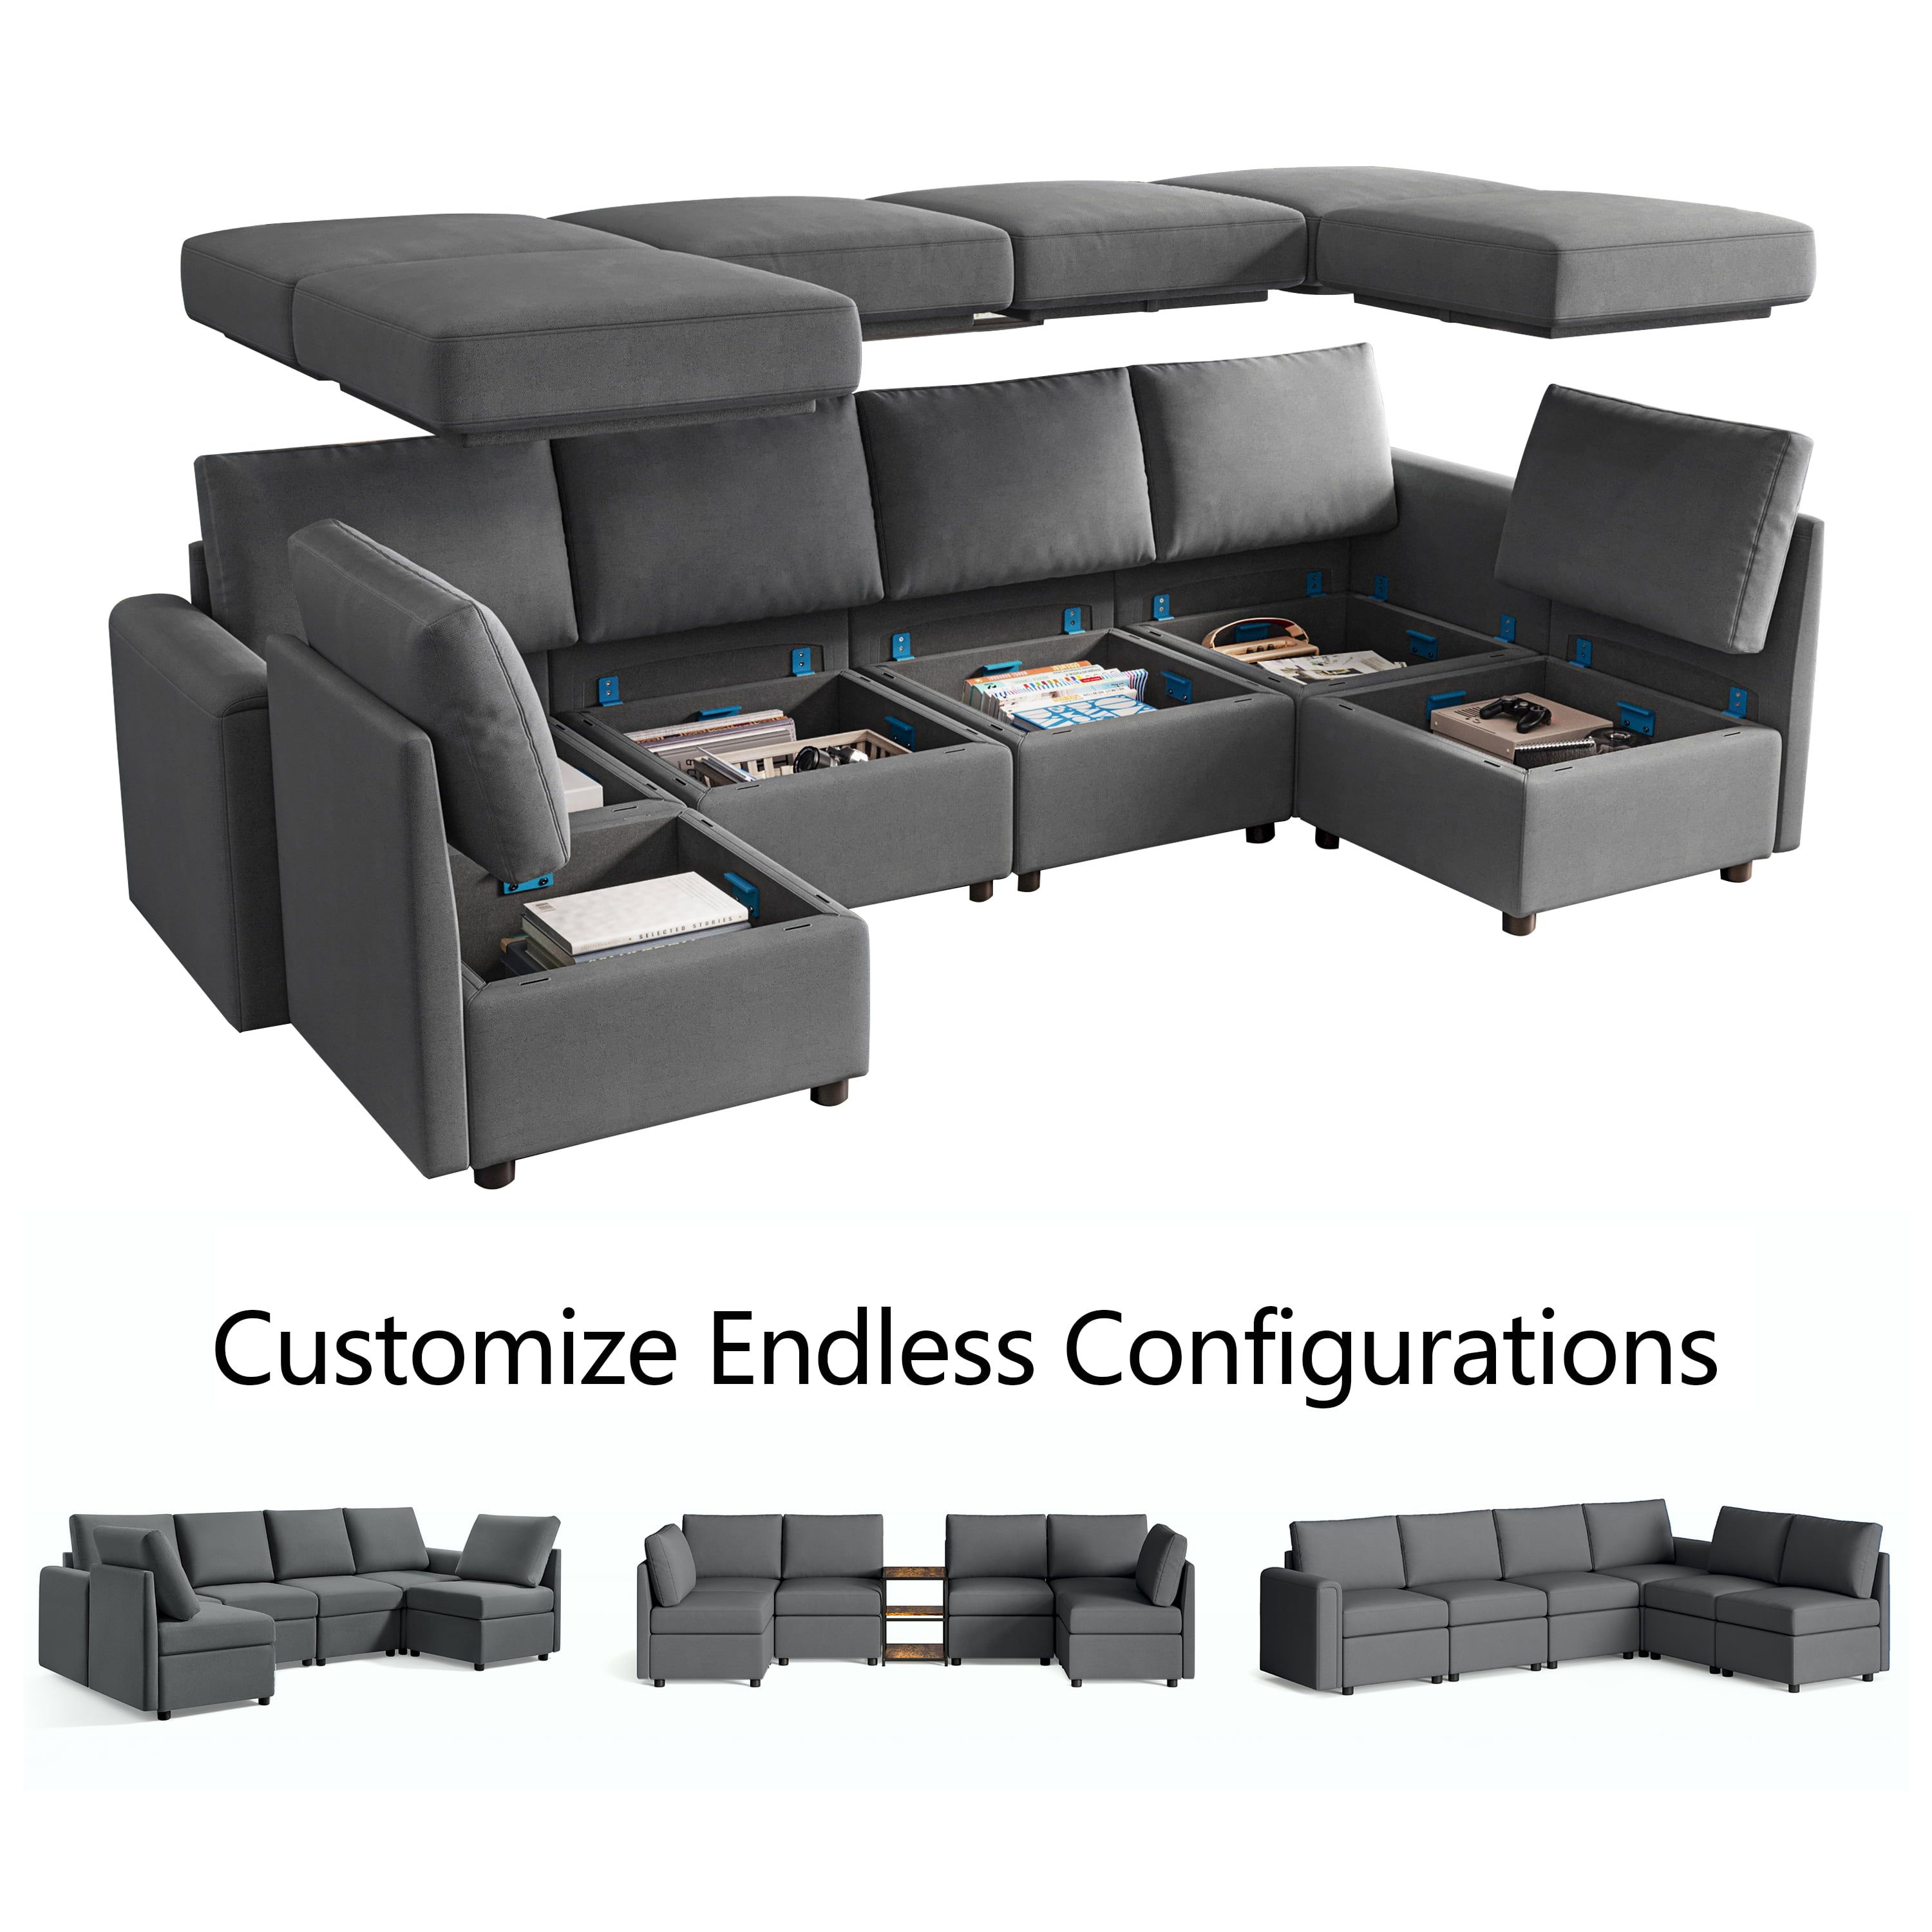 Linsy Home Modular Couches And Sofas Sectional With Storage Sectional Sofa  U Shaped Sectional Couch With Reversible Chaises, Dark Gray – Walmart Within Sofa Sectionals With Storage (View 4 of 15)